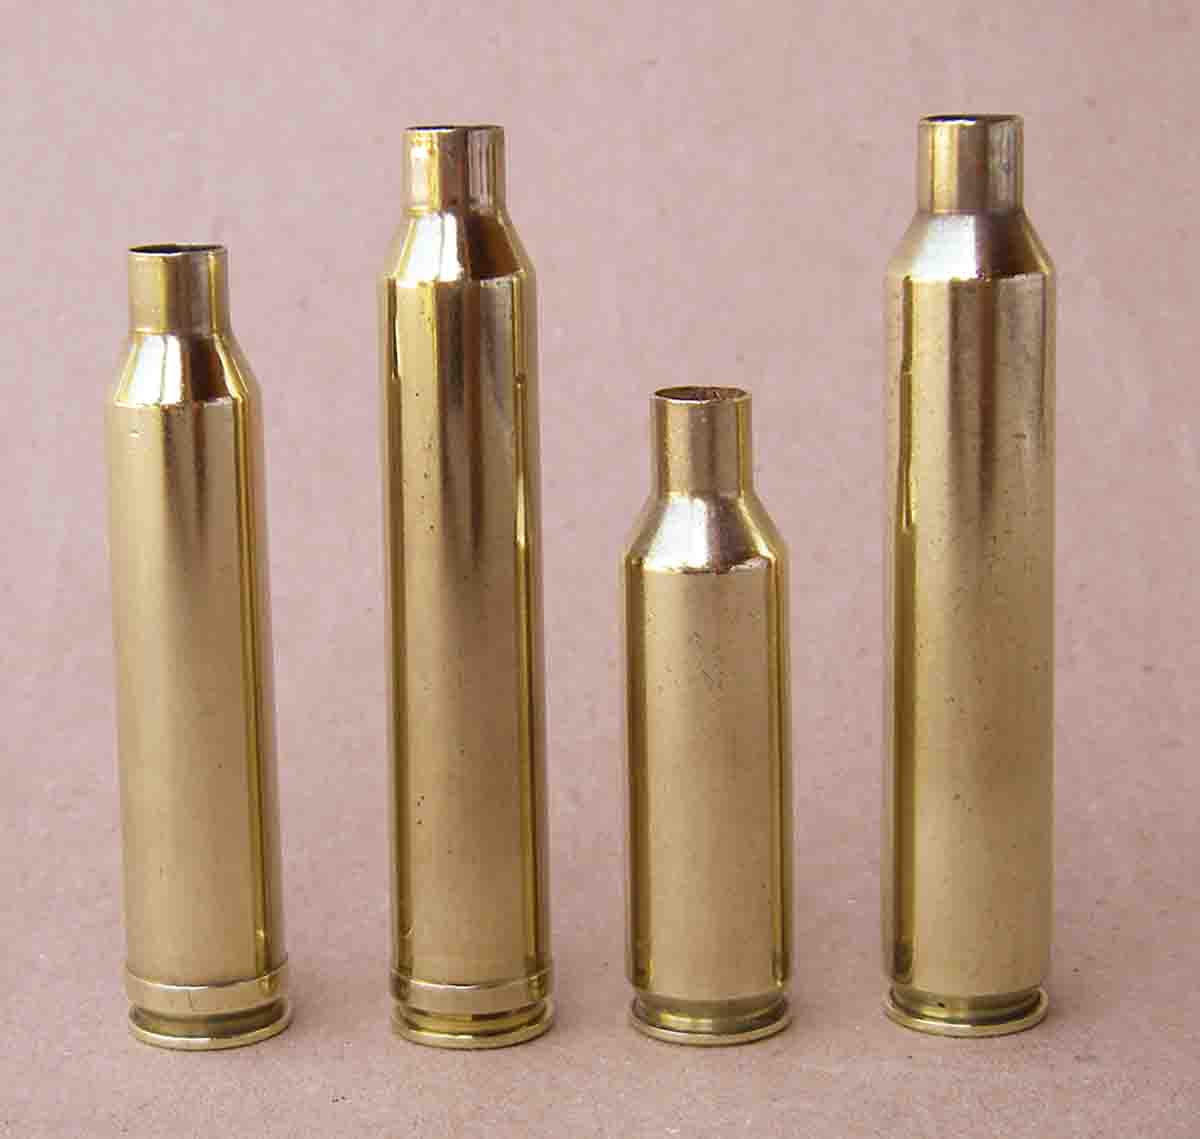 Remington has introduced other 7mm “magnum” cartridges; however, they have never achieved the widespread popularity of the 7mm Remington Magnum. Left to right: 7mm Remington Magnum, 7mm Shooting Times Westerner, 7mm Remington Short  Action Ultra Magnum and 7mm Remington Ultra Magnum.